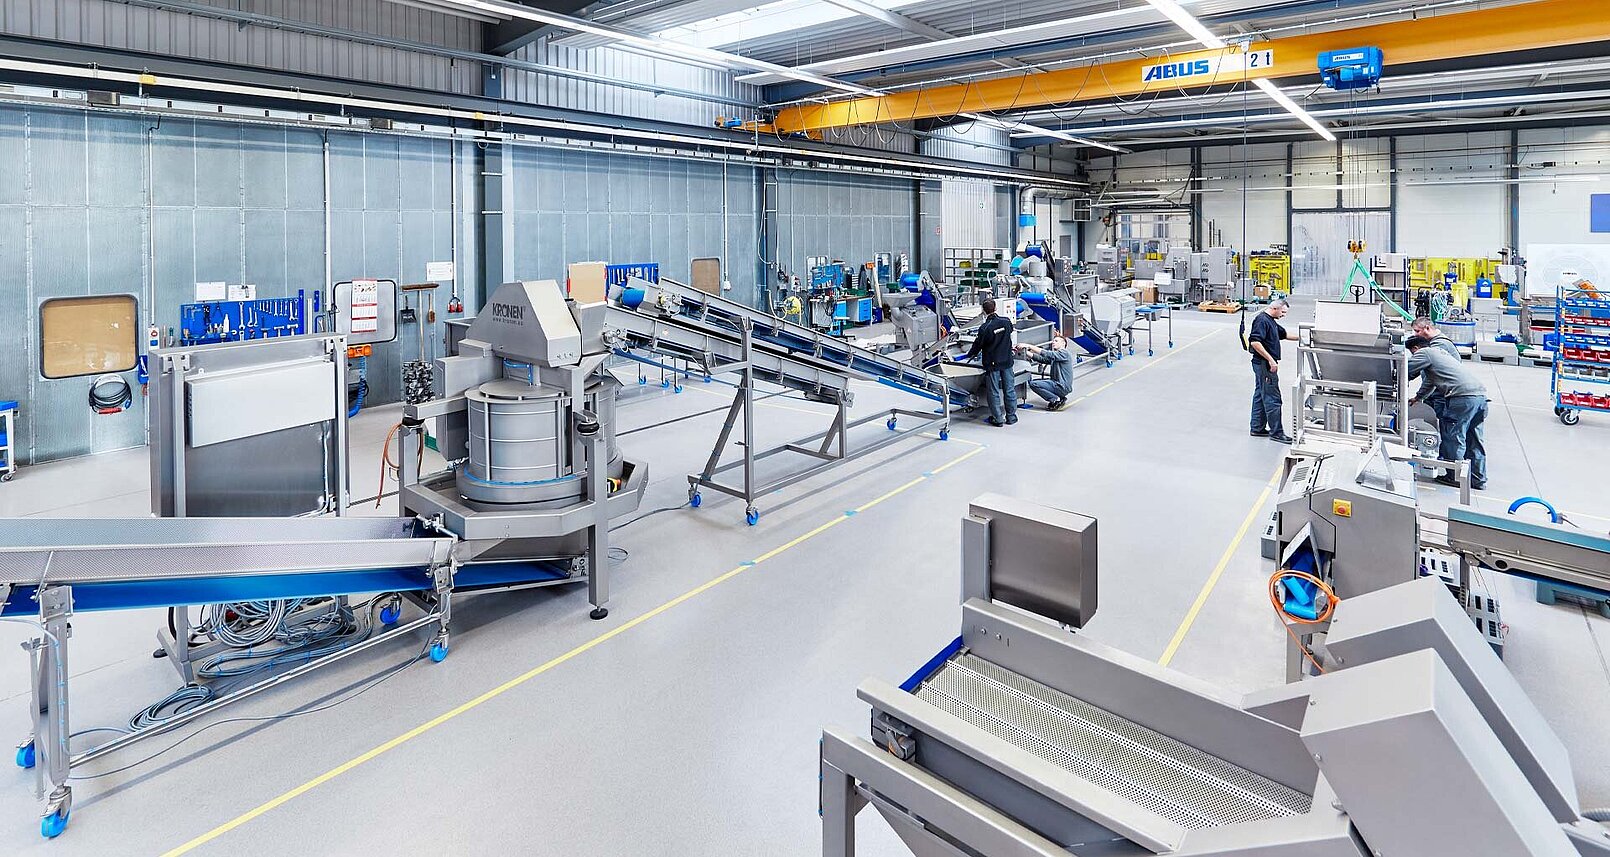 KRONEN food technology: production at the site Kehl-Goldscheuer, Germany